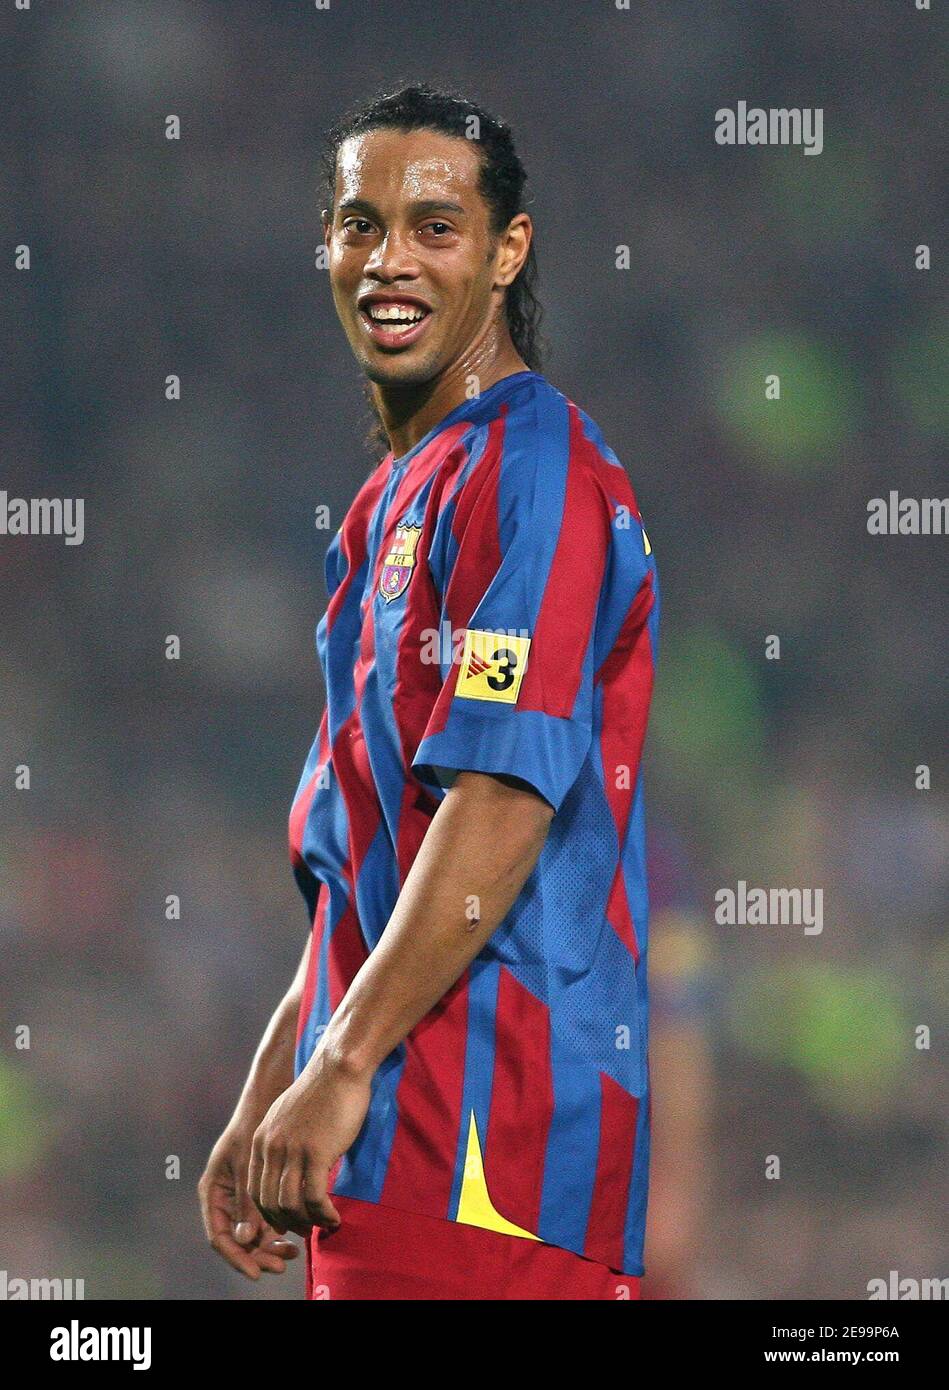 Barcelona's Ronaldinho during the Spanish primera league, FC Barcelona vs  Real Madrid, at the Nou Camp Stadium, in Barcelona, Spain, on April 1,  2006. The game ended in a draw 1-1. Photo